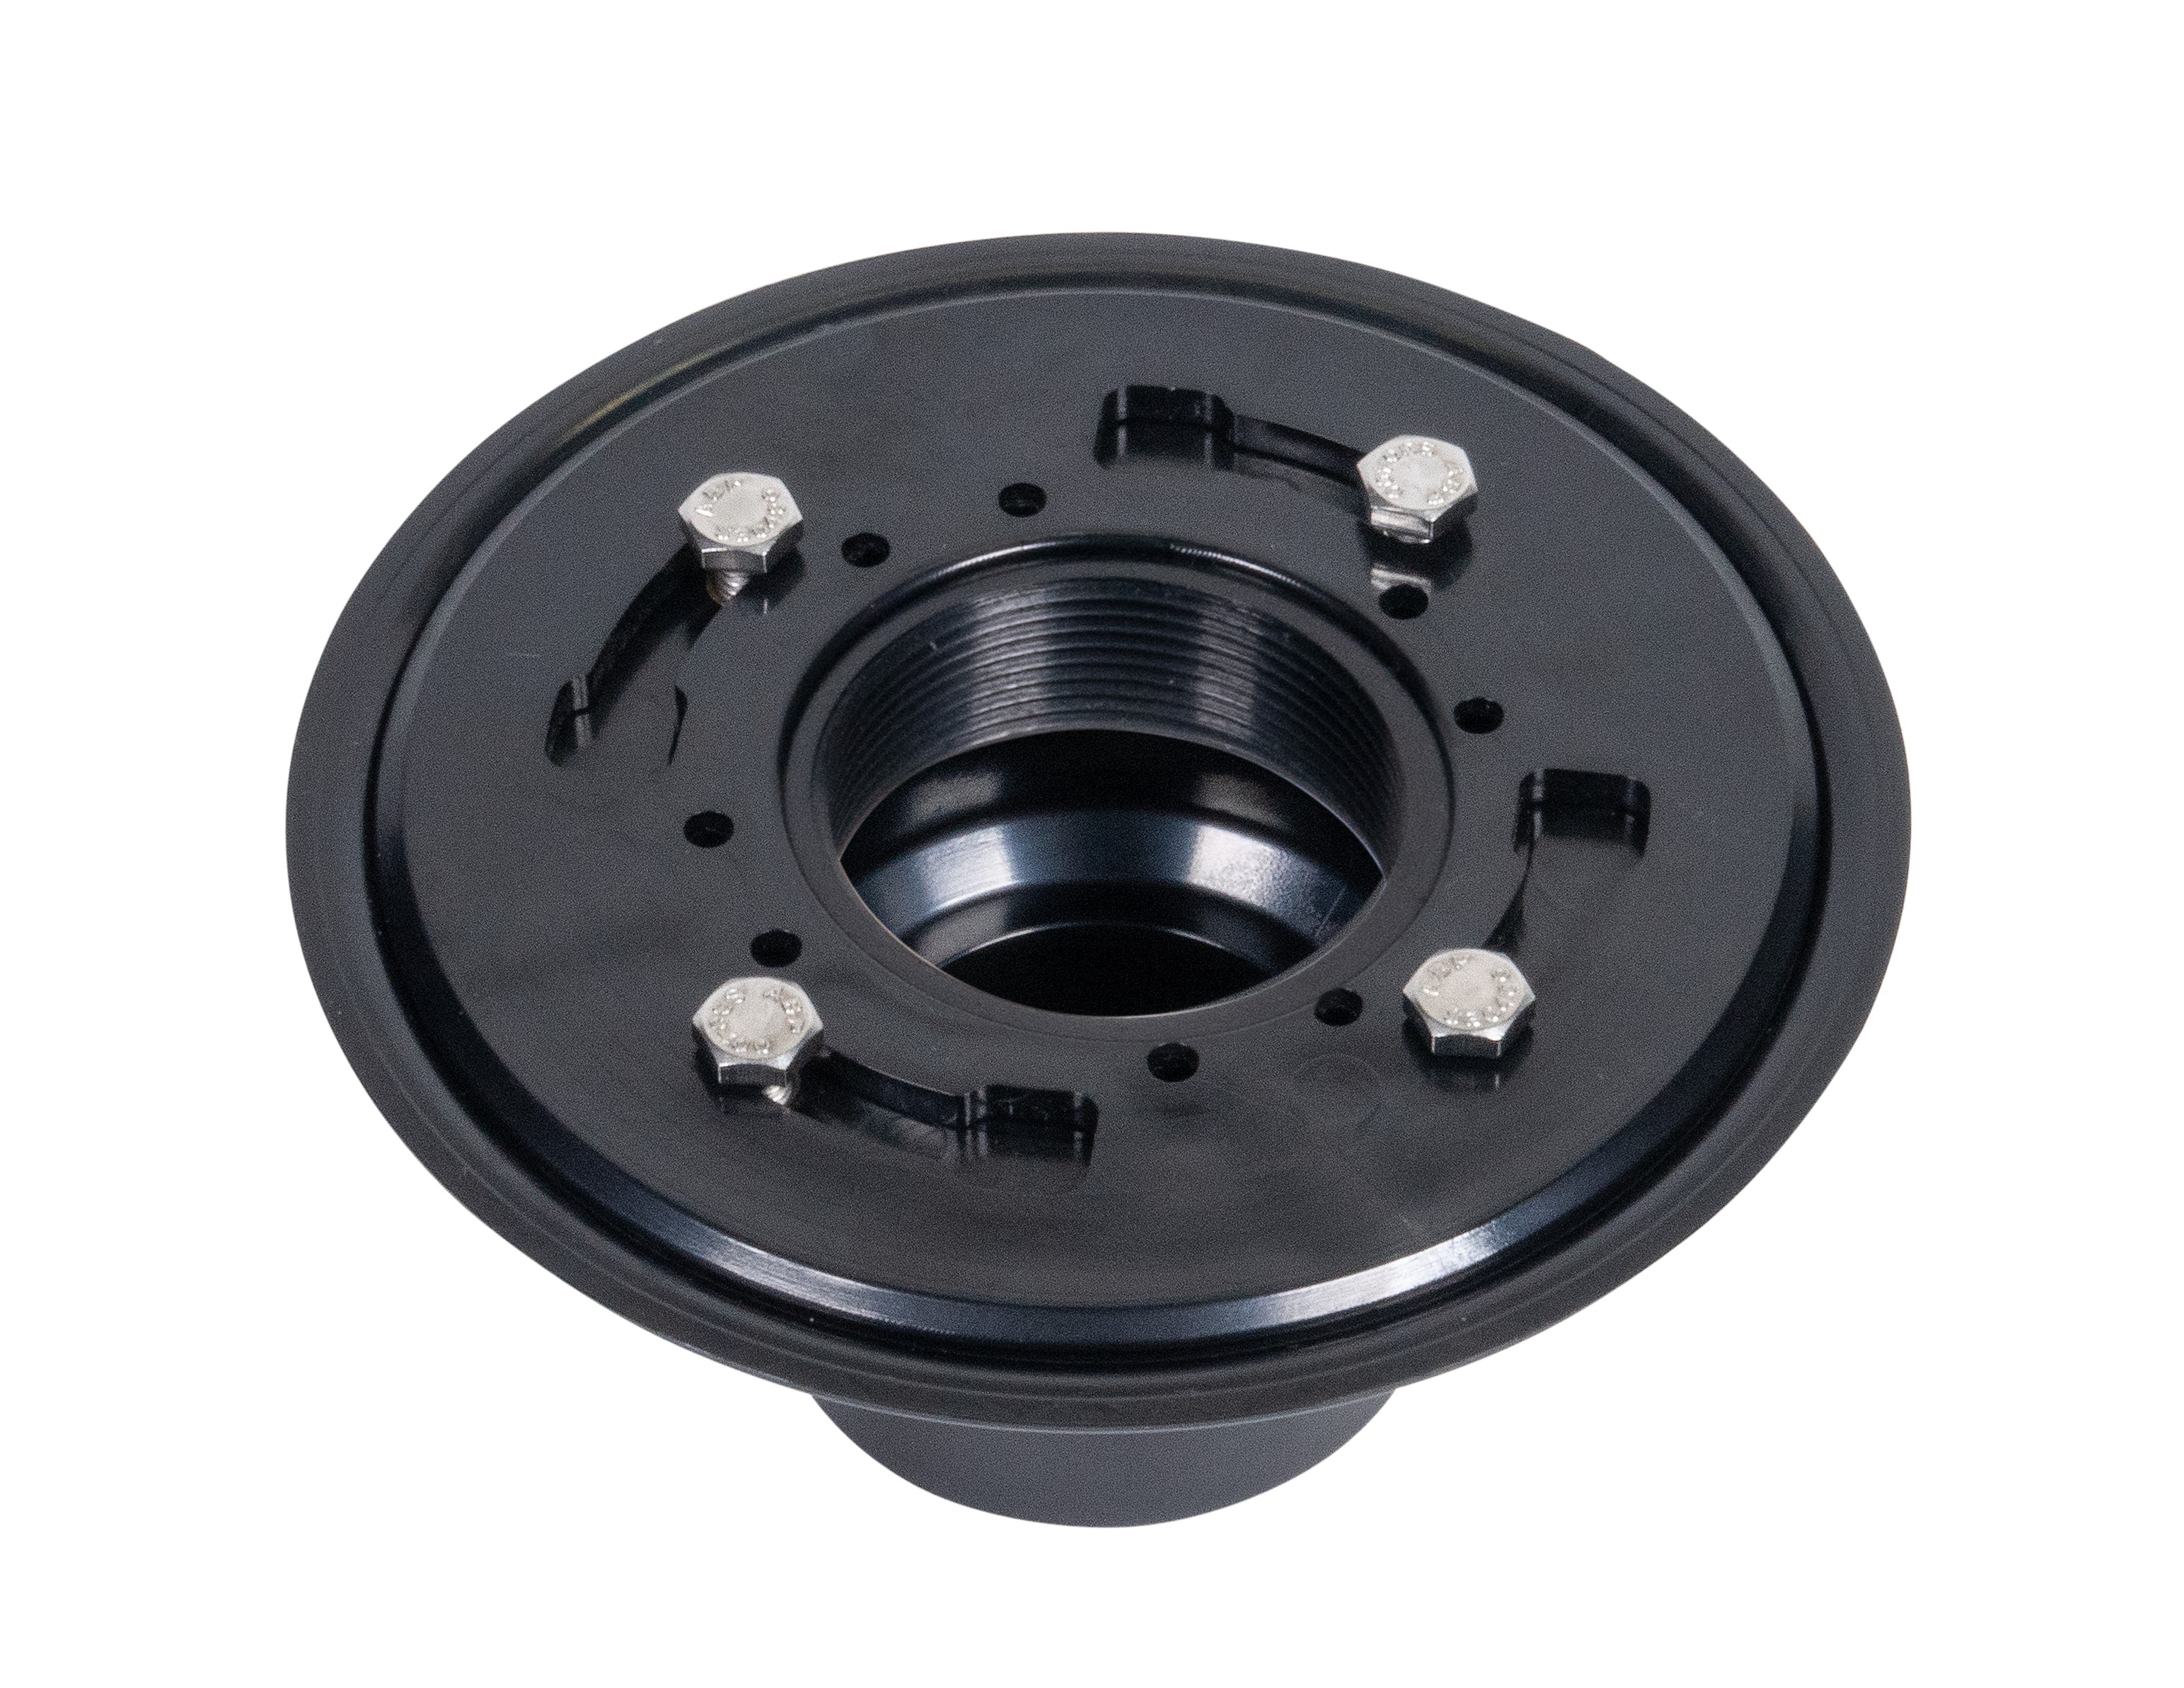 assembled threaded flange and drain base